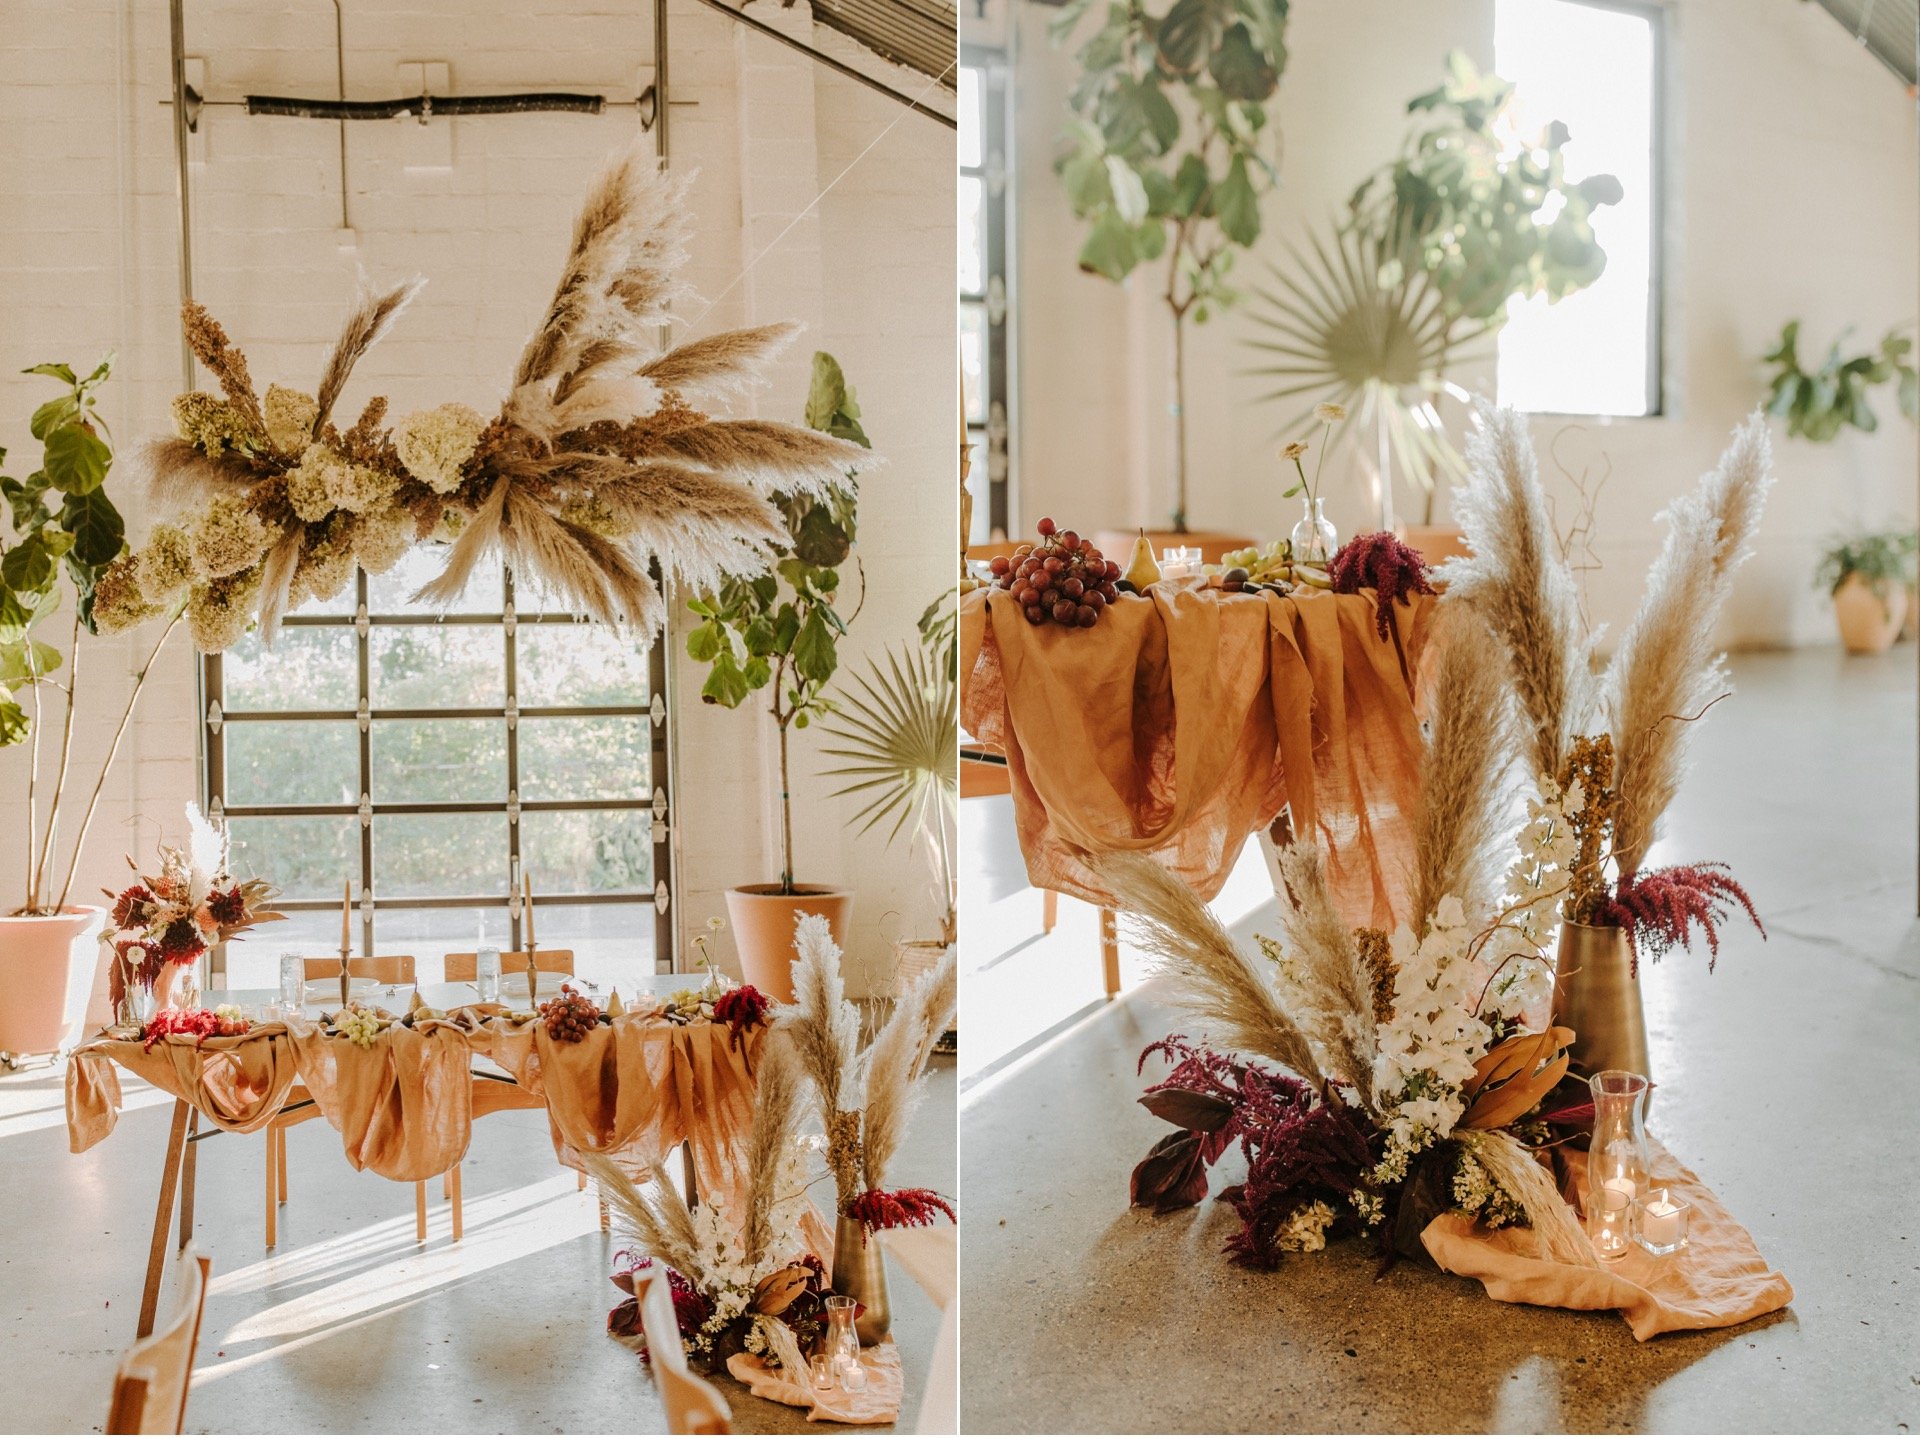 Sweetheart table with hanging installation at Paikka wedding